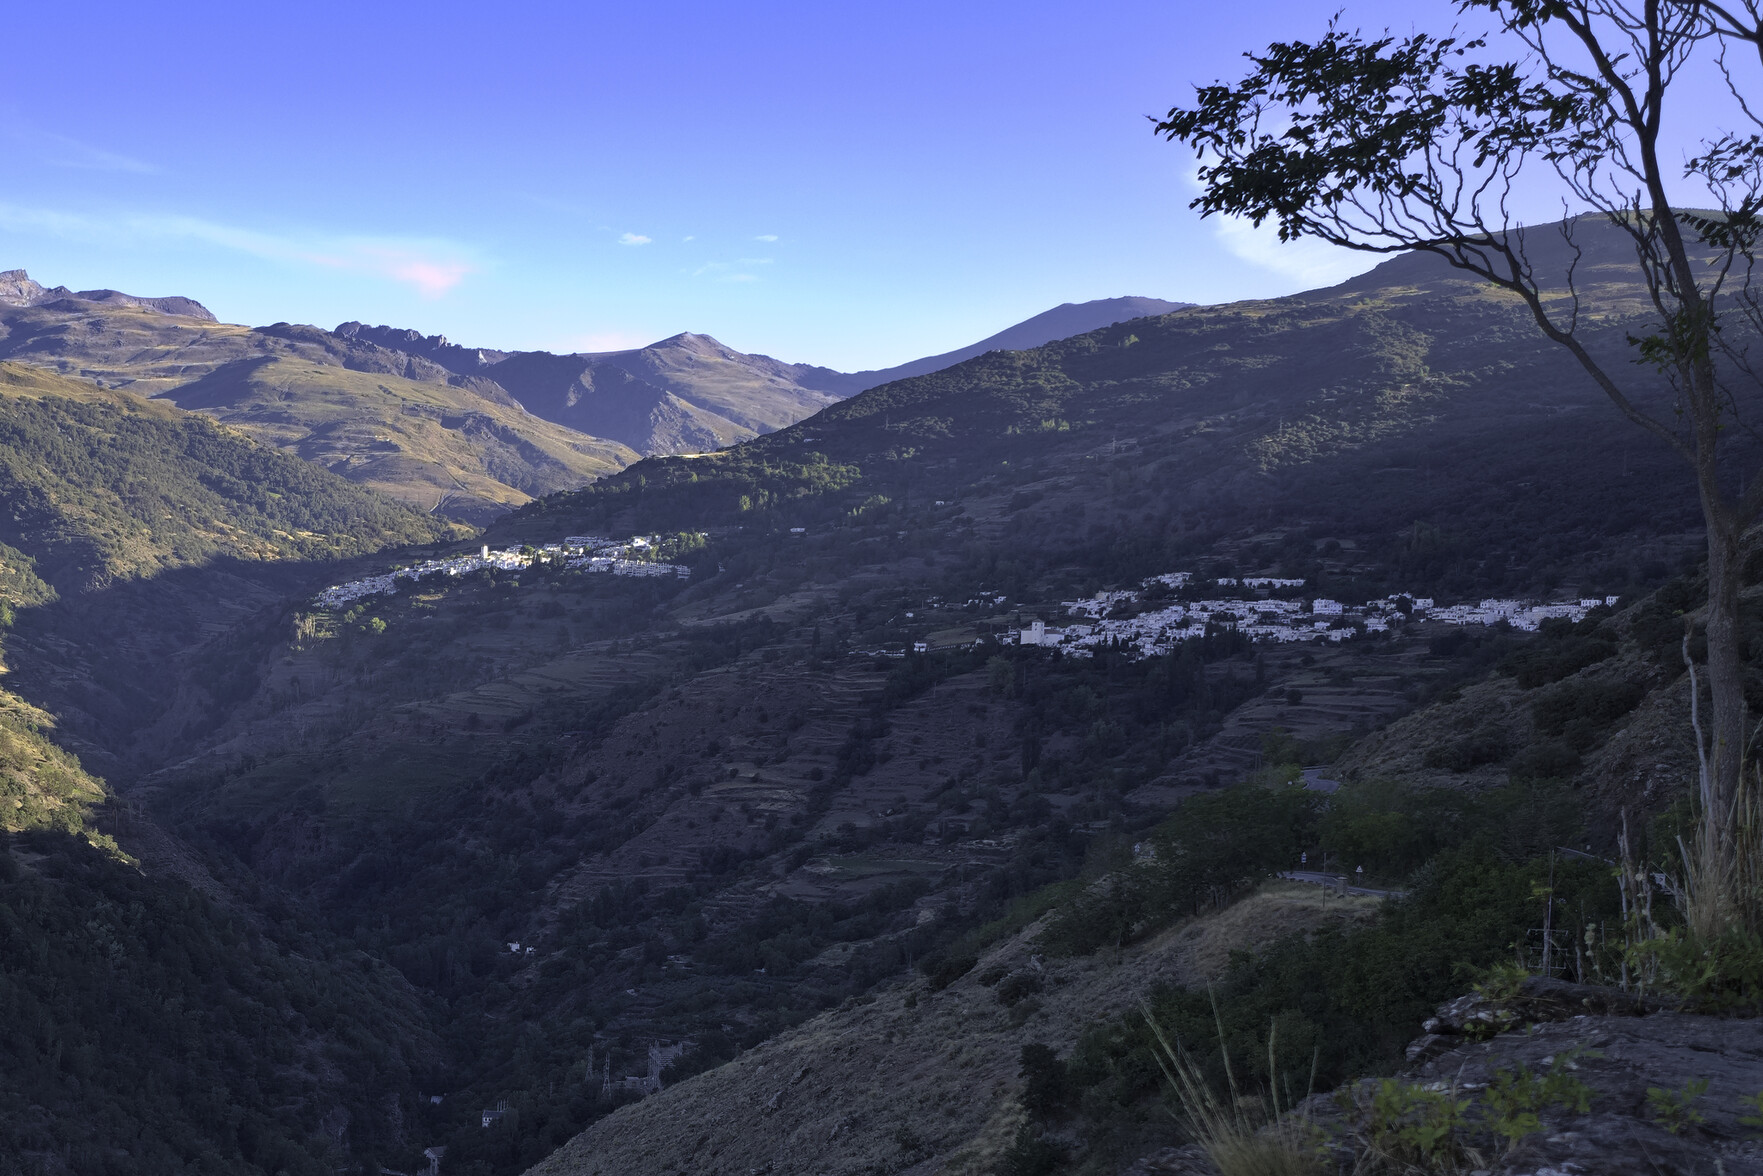 The towns of Capileira and Bubion with the mountains of the main Sierra Nevada ridge line beyond.